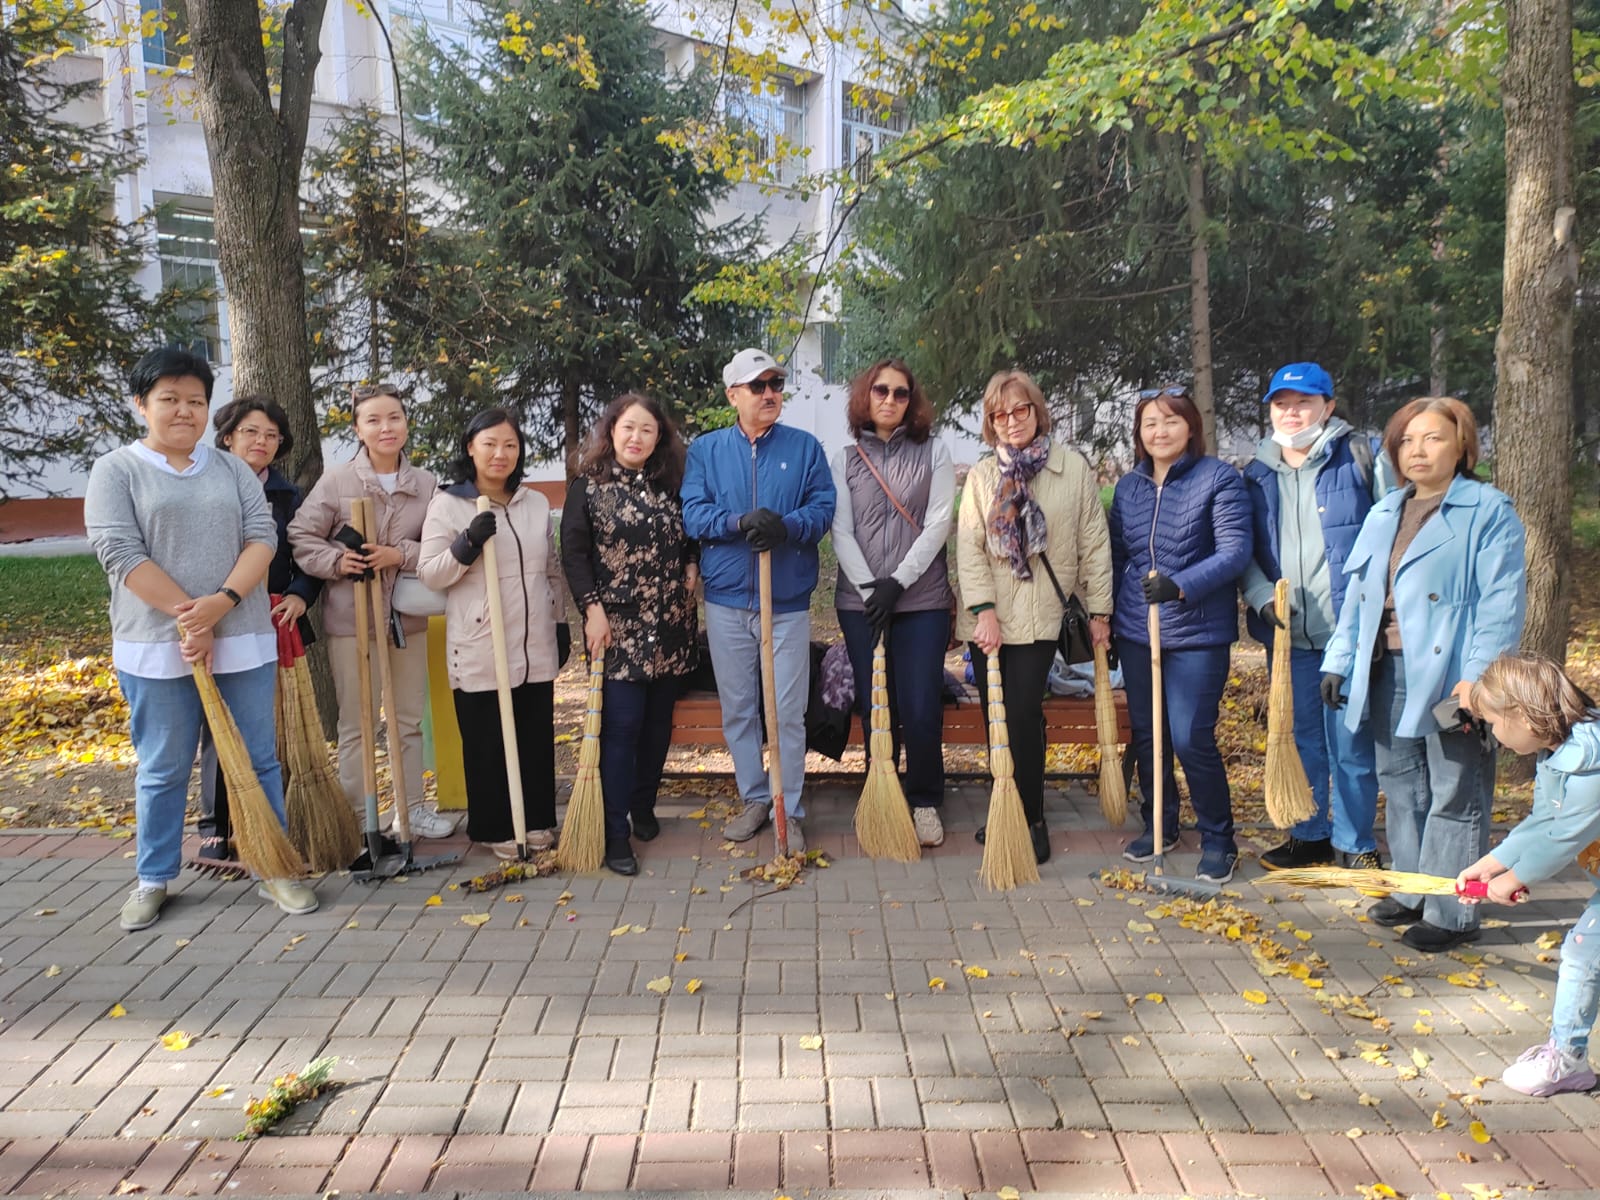 TEACHERS AND STUDENTS OF THE FACULTY TOOK PART IN THE CLEAN-UP EVENT AND CARRIED OUT CLEANING